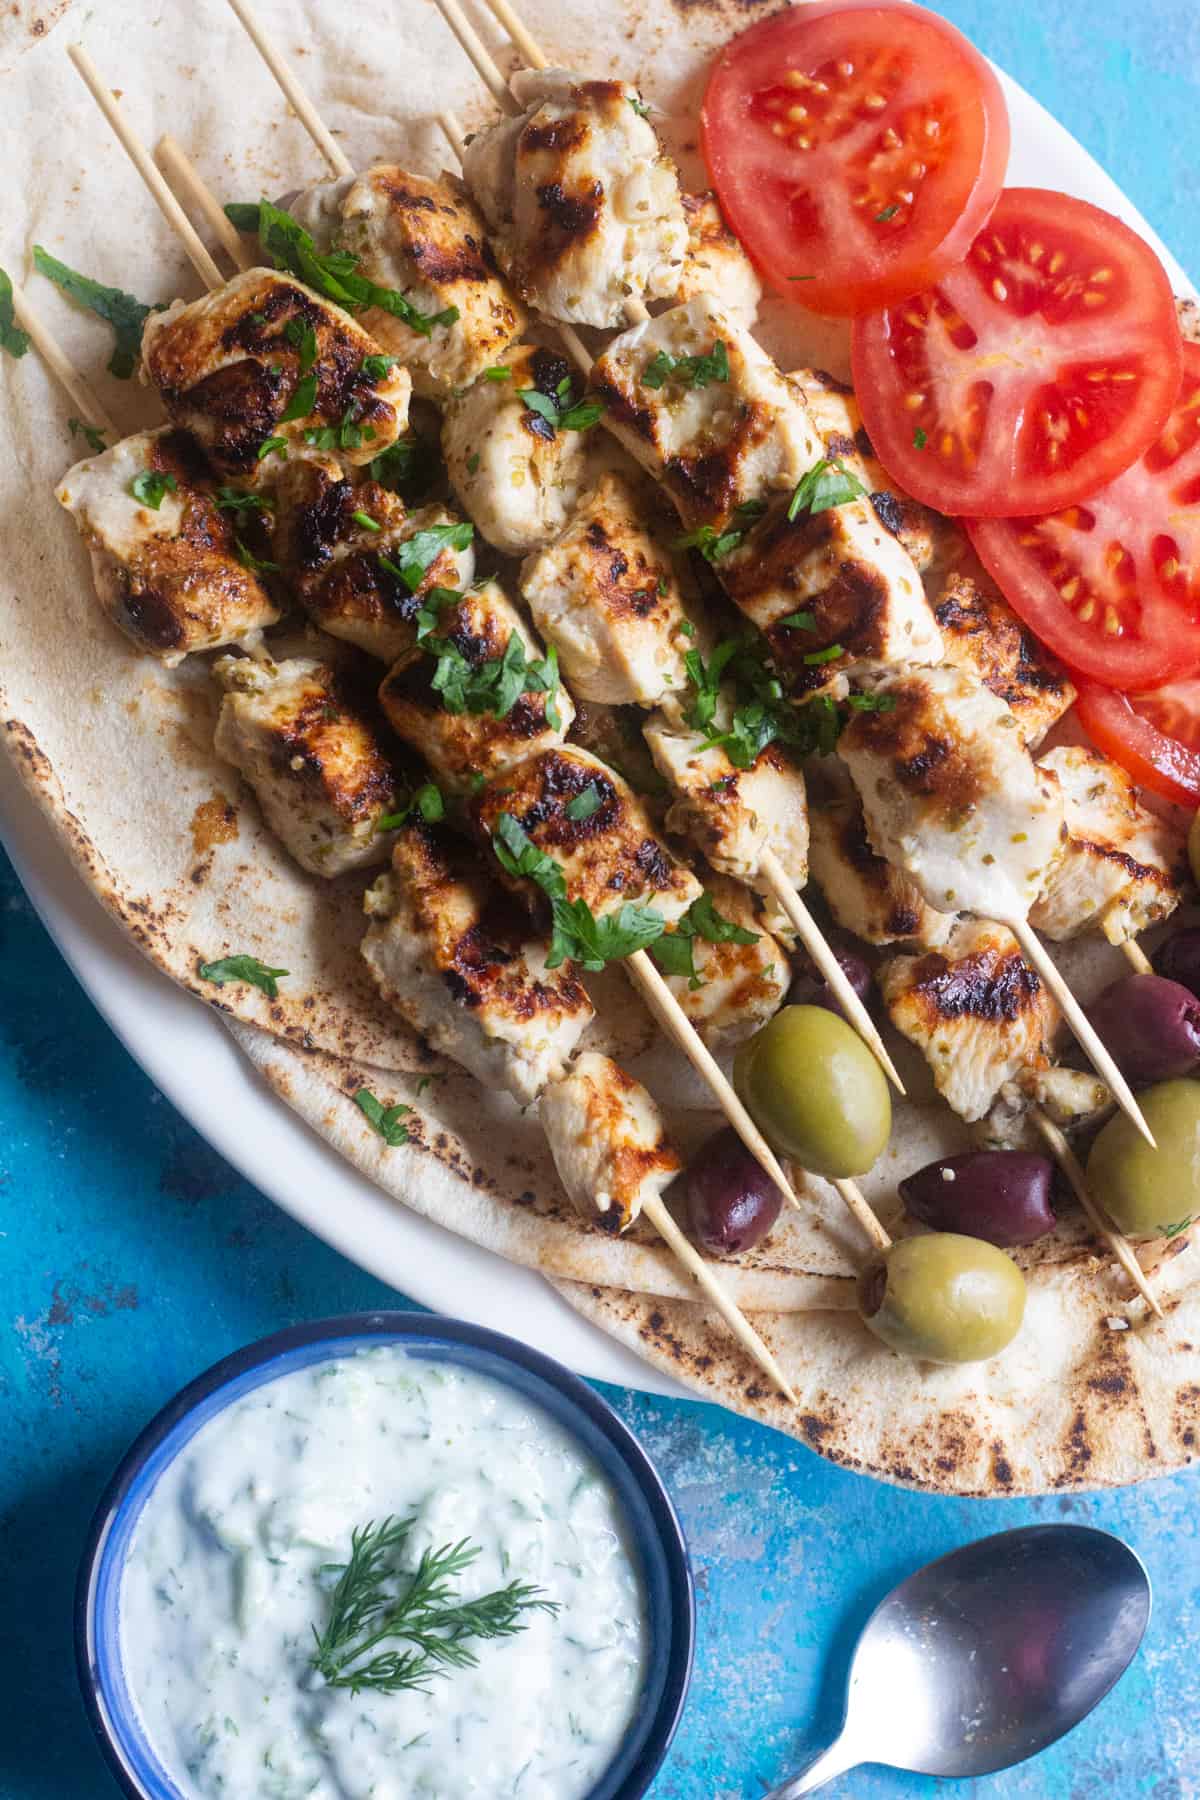 Try this easy recipe for homemade chicken souvlaki. Made with a delicious garlic and lemon marinade, this classic street food is packed with amazing Mediterranean flavors and served with creamy tzatziki sauce.